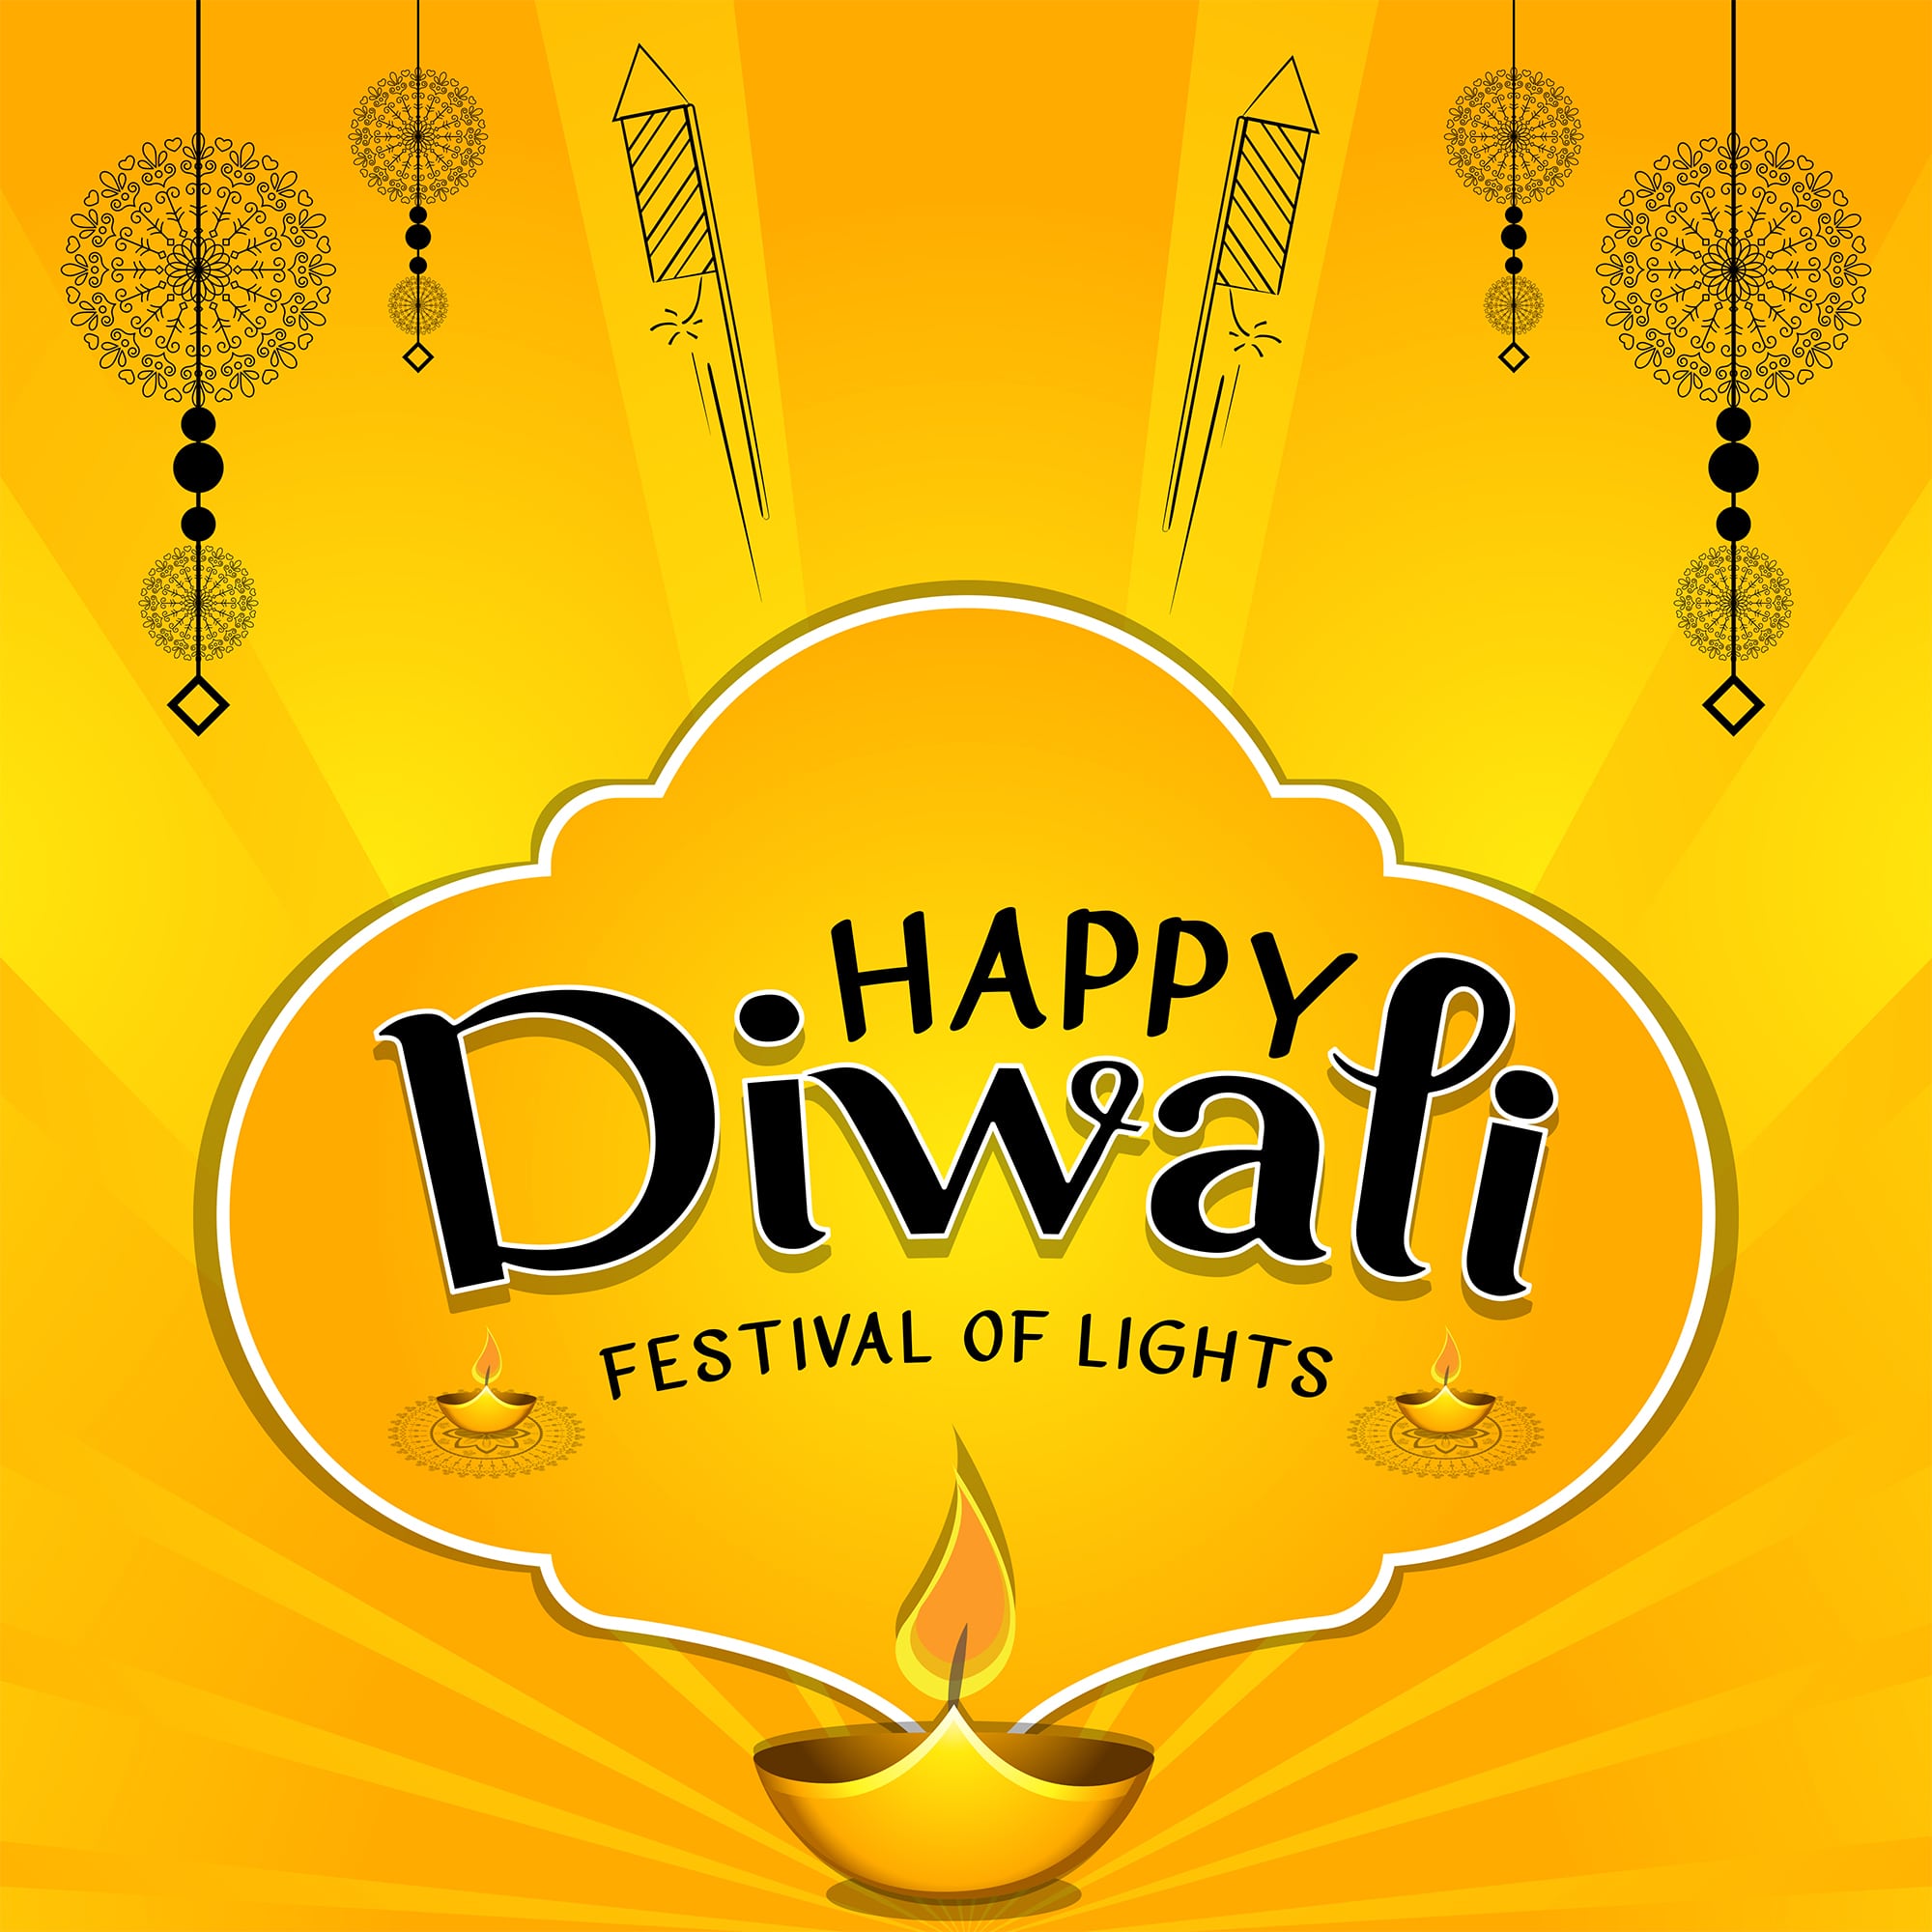 Creative Happy Diwali vector illustration template for free download with firework and decorative design elements